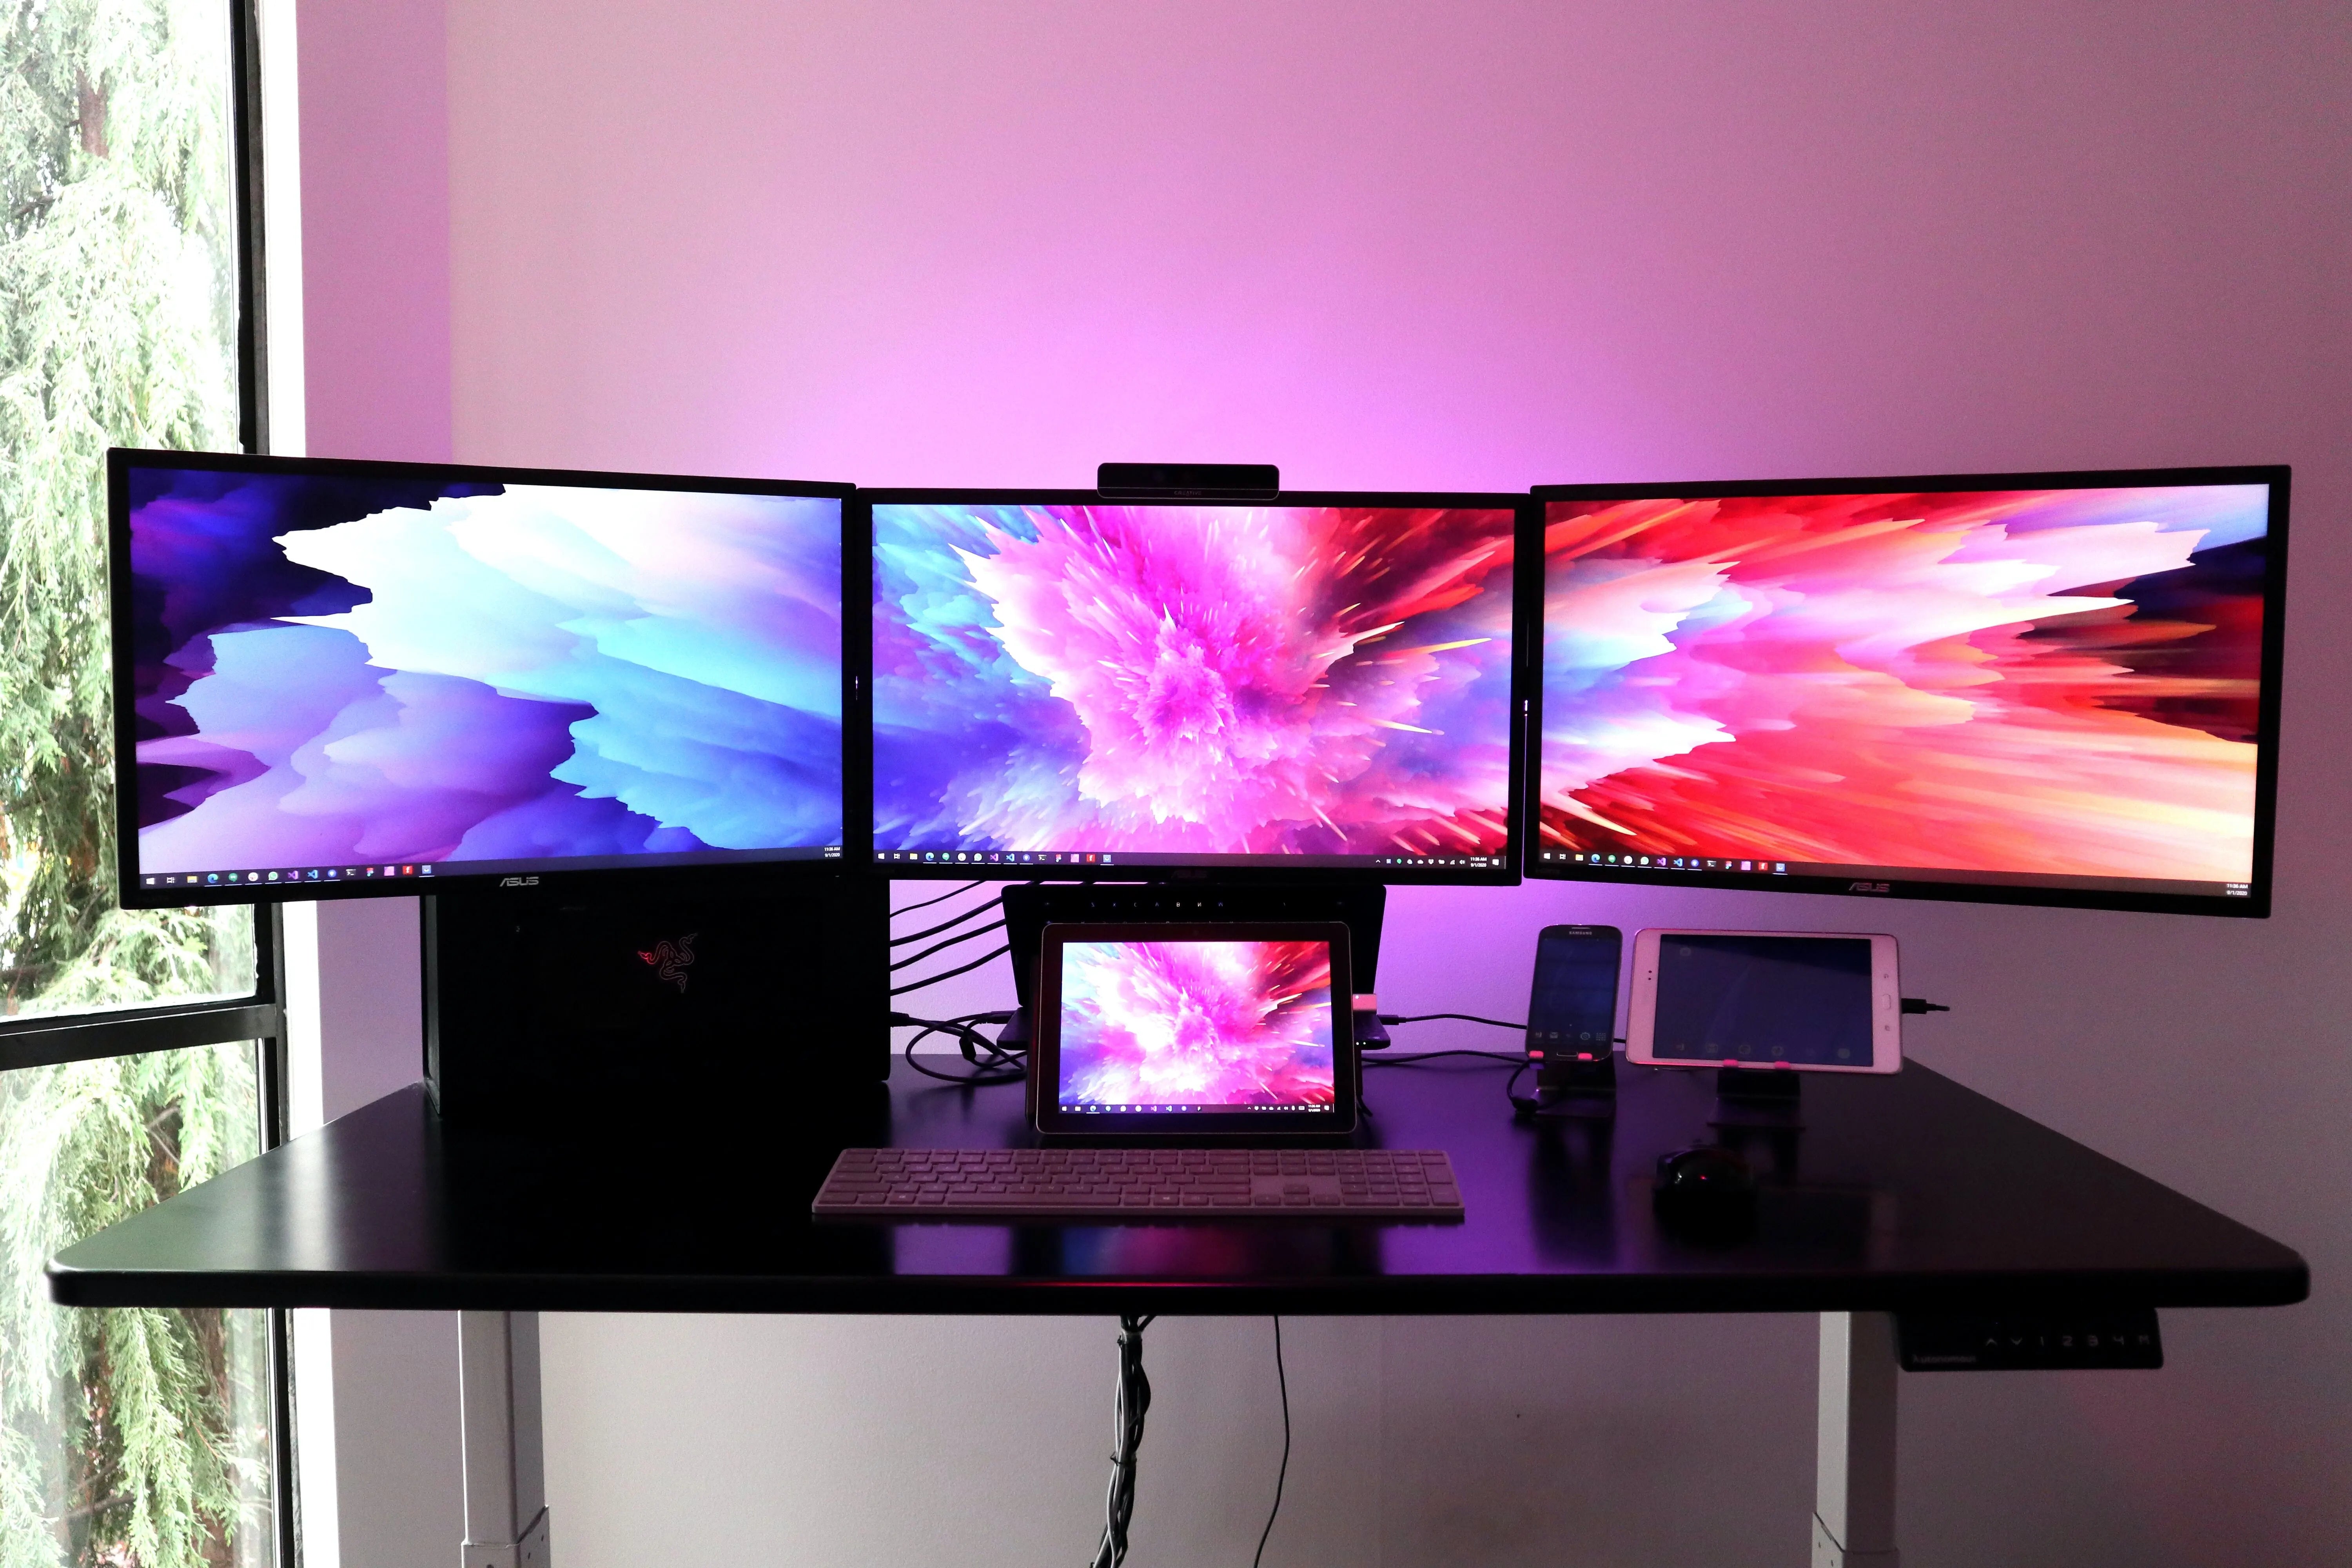 Computer setup with multiple monitors